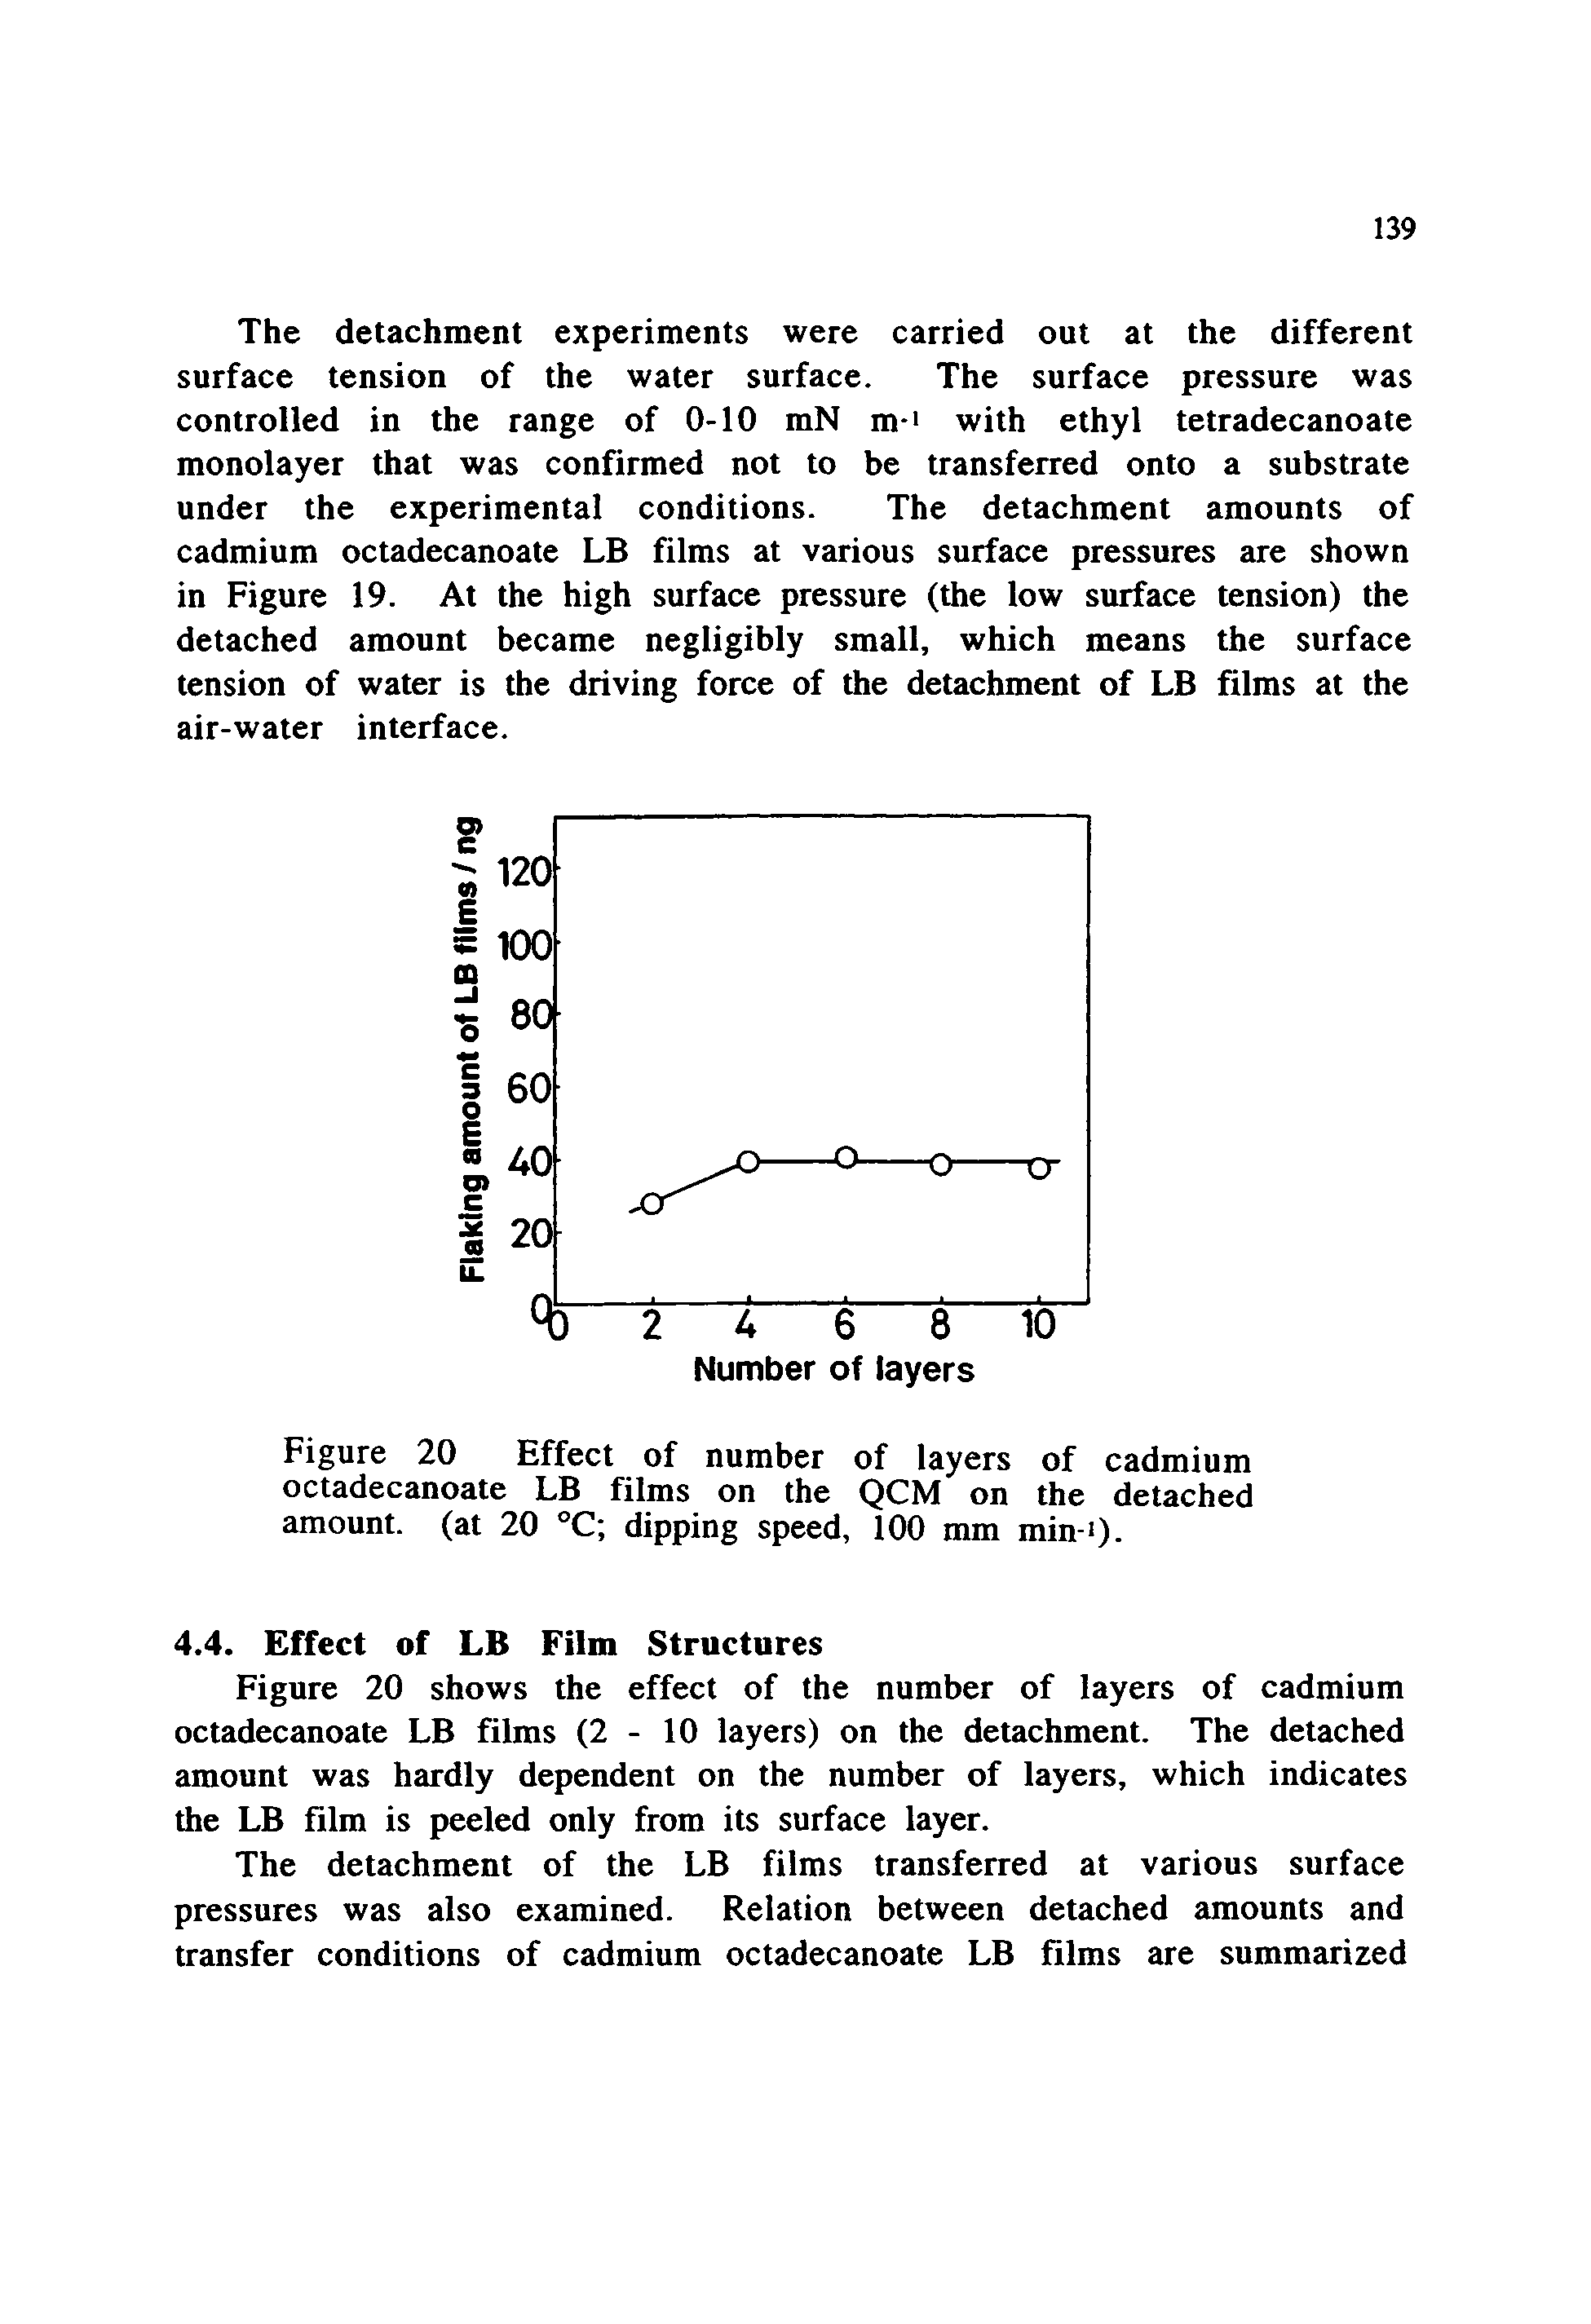 Figure 20 Effect of number of layers of cadmium octadecanoate LB films on the QCM on the detached amount, (at 20 °C dipping speed, 100 mm min-i)-...